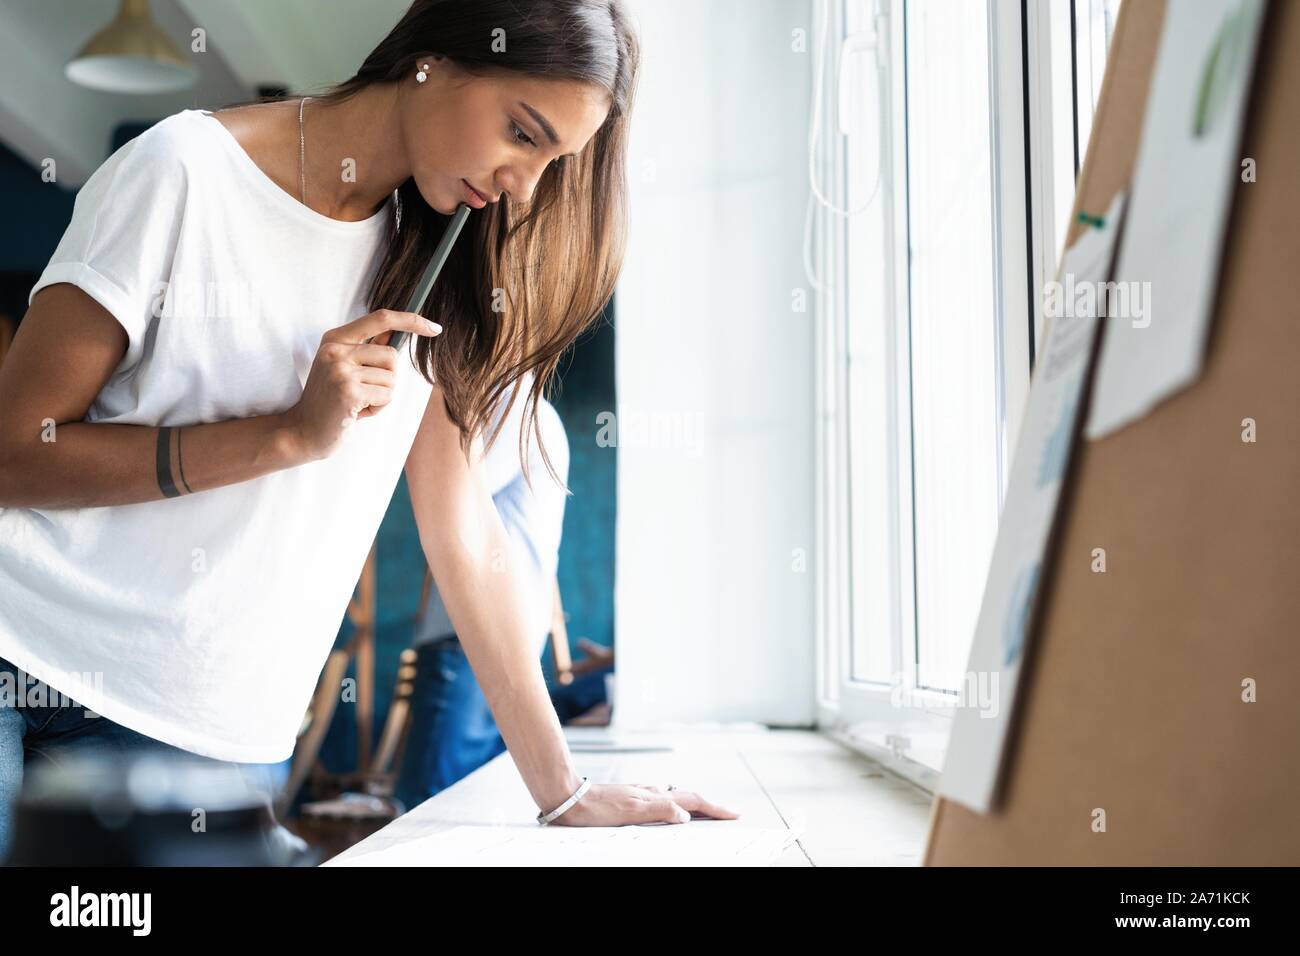 Portrait of young female architect working on project. Stock Photo